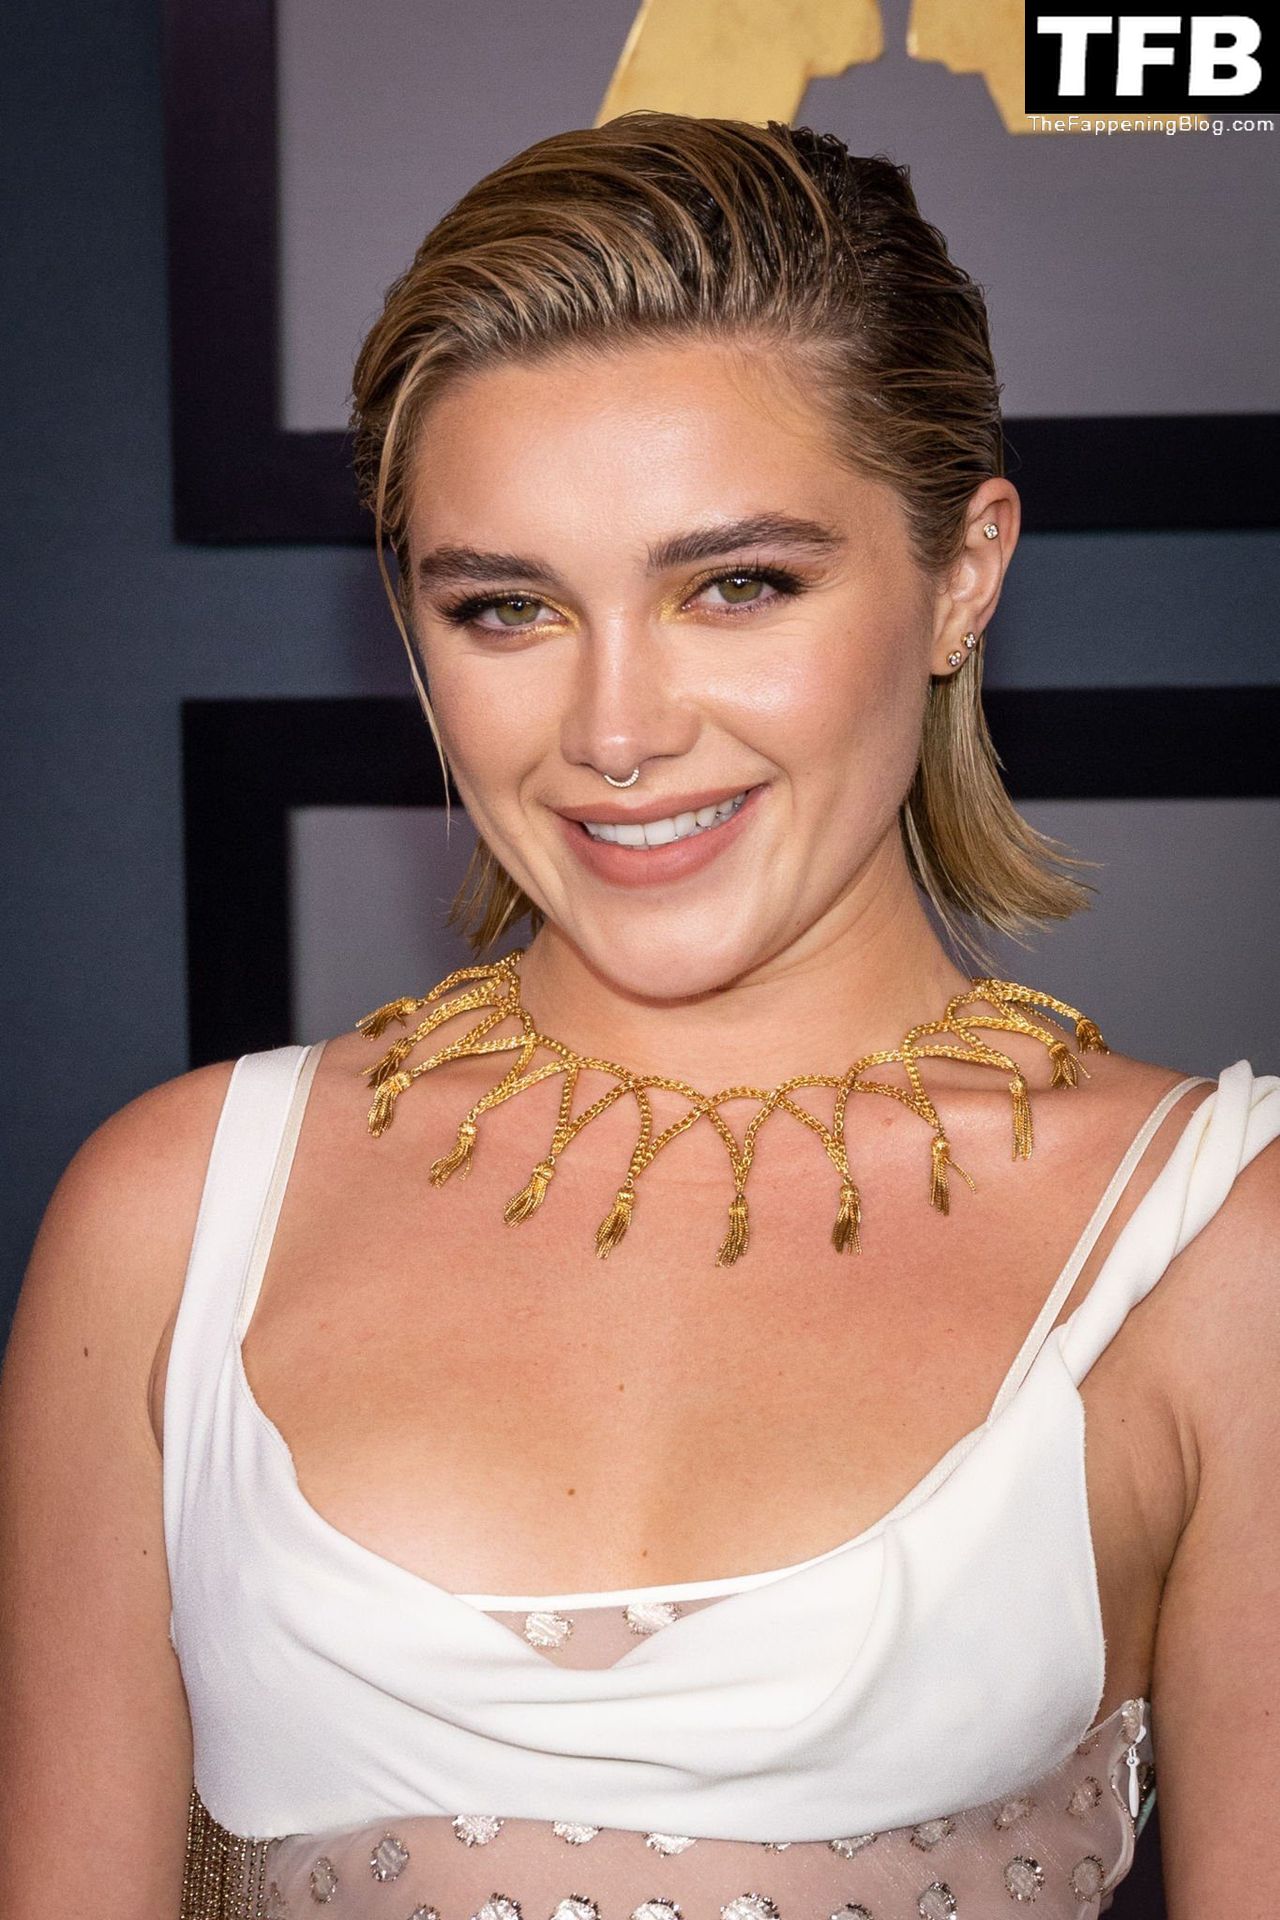 Florence-Pugh-Sexy-The-Fappening-Blog-7-1.jpg